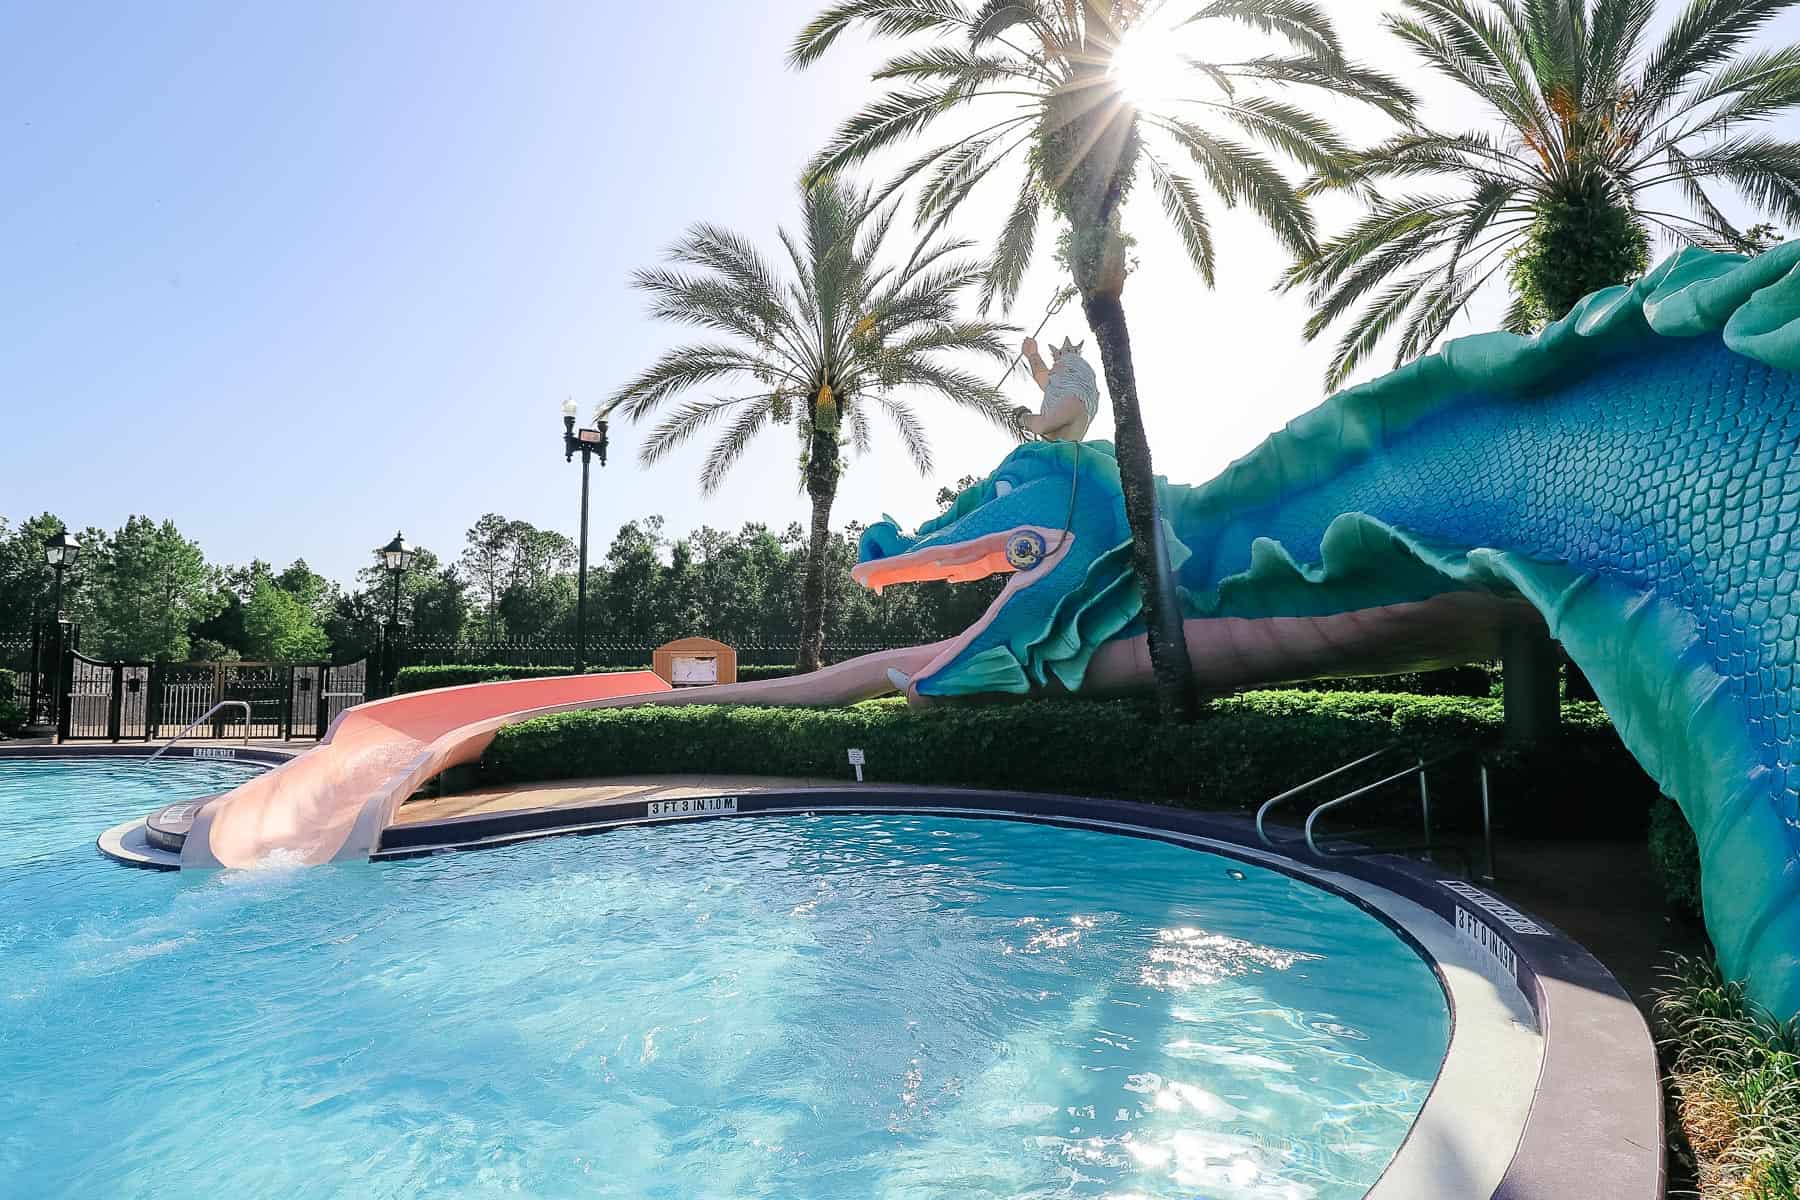 Disney's Port Orleans French Quarter waterslide, Scales the Sea Serpent 